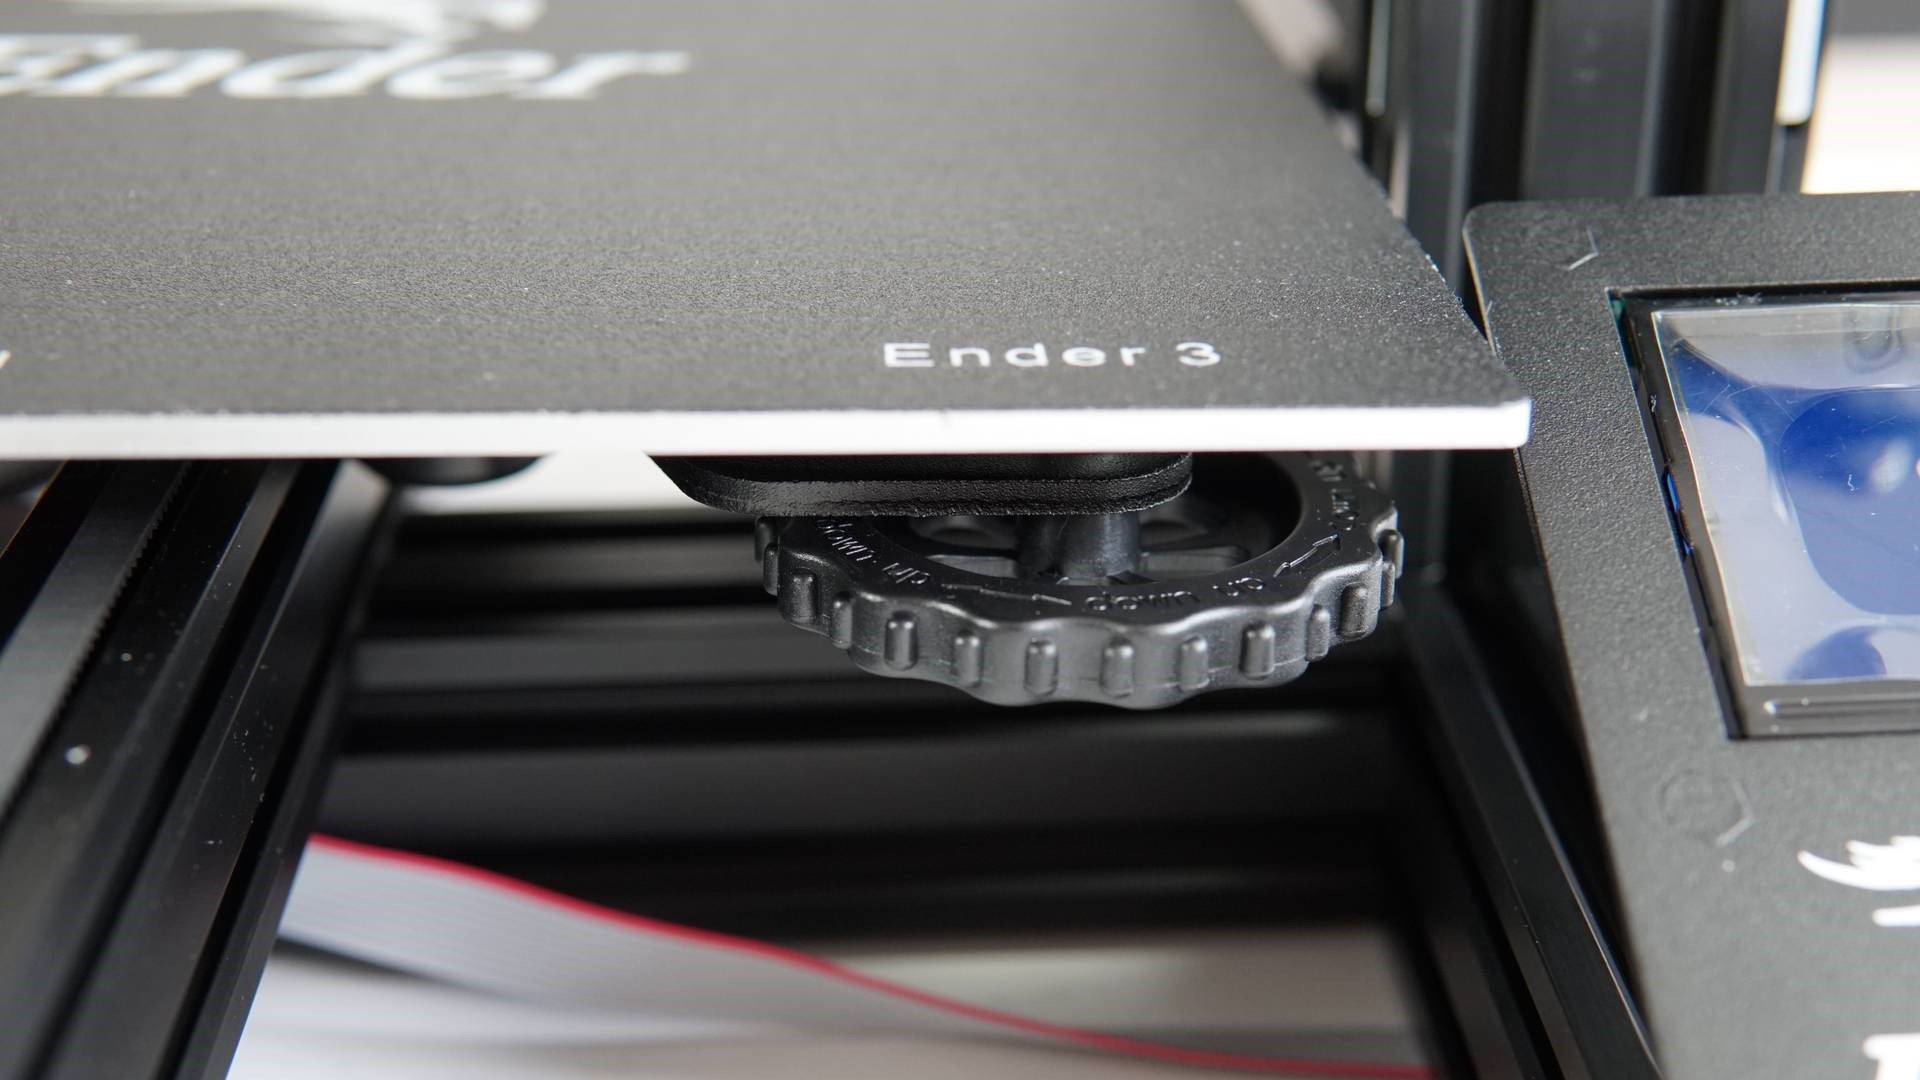 Extruder Tension: What it is and How to Calibrate it Properly